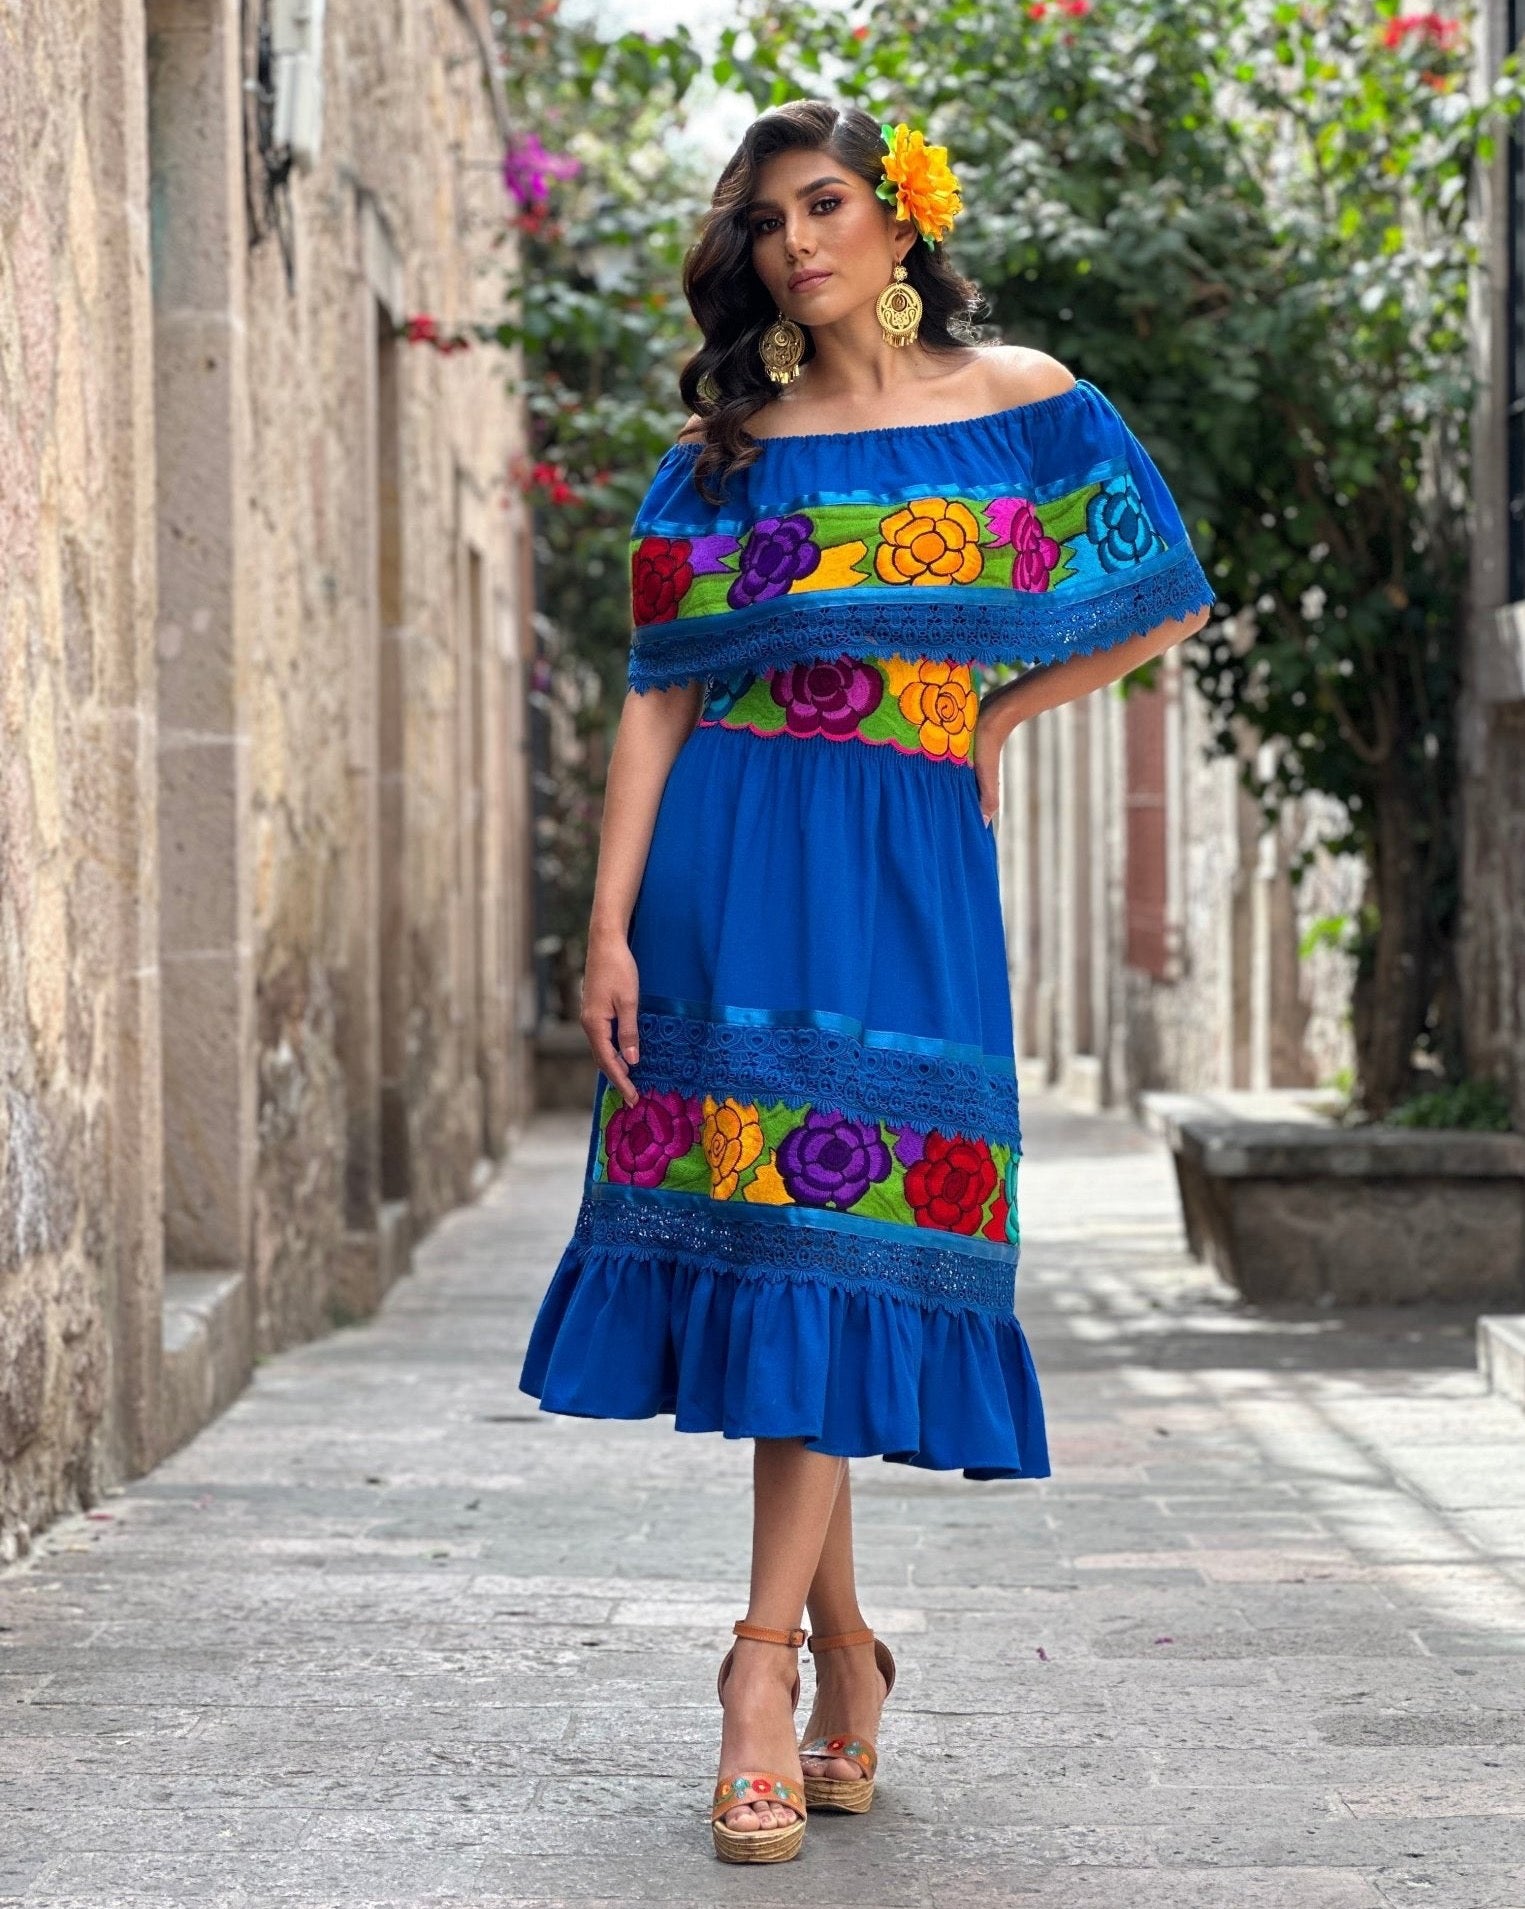 Colorful Mexican Floral Embroidered Dress in Royal Blue